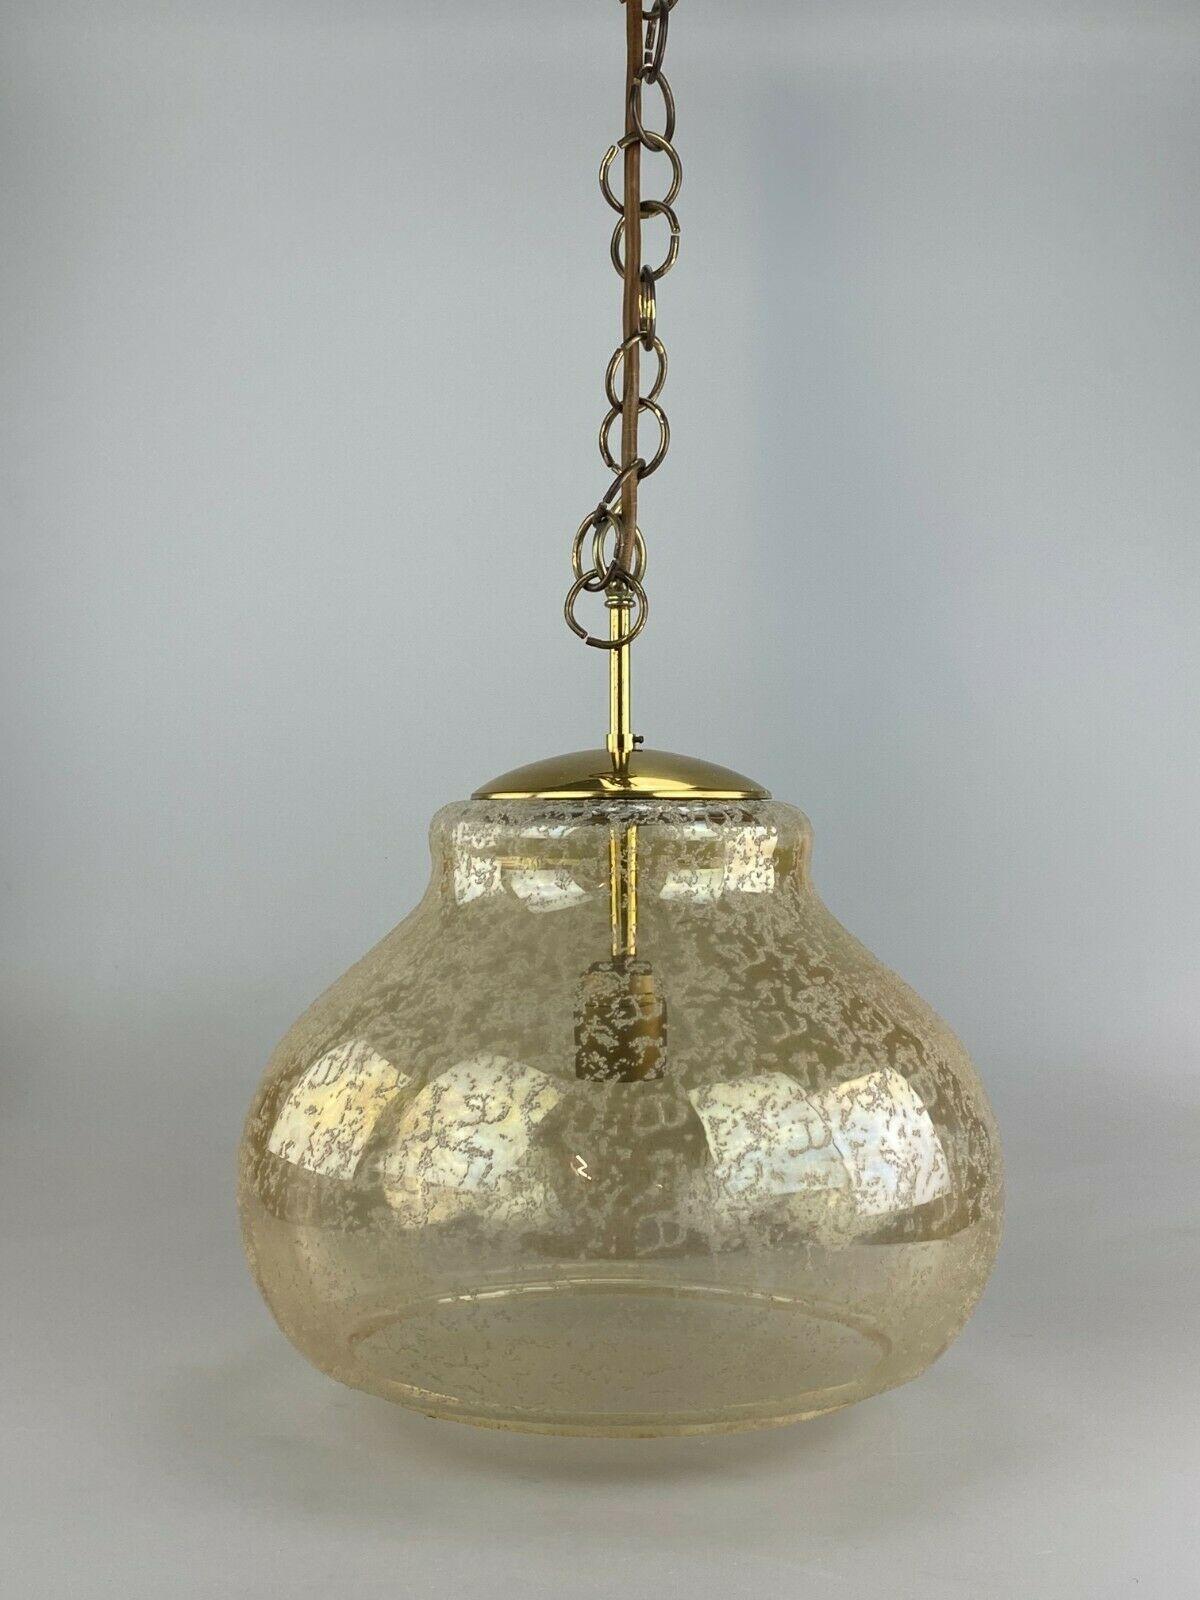 60s 70s lamp light ceiling lamp metal glass space age design 60s

Object: ceiling lamp

Manufacturer:

Condition: good

Age: around 1960-1970

Dimensions:

Diameter = 34cm
Height = 30cm

Other notes:

The pictures serve as part of